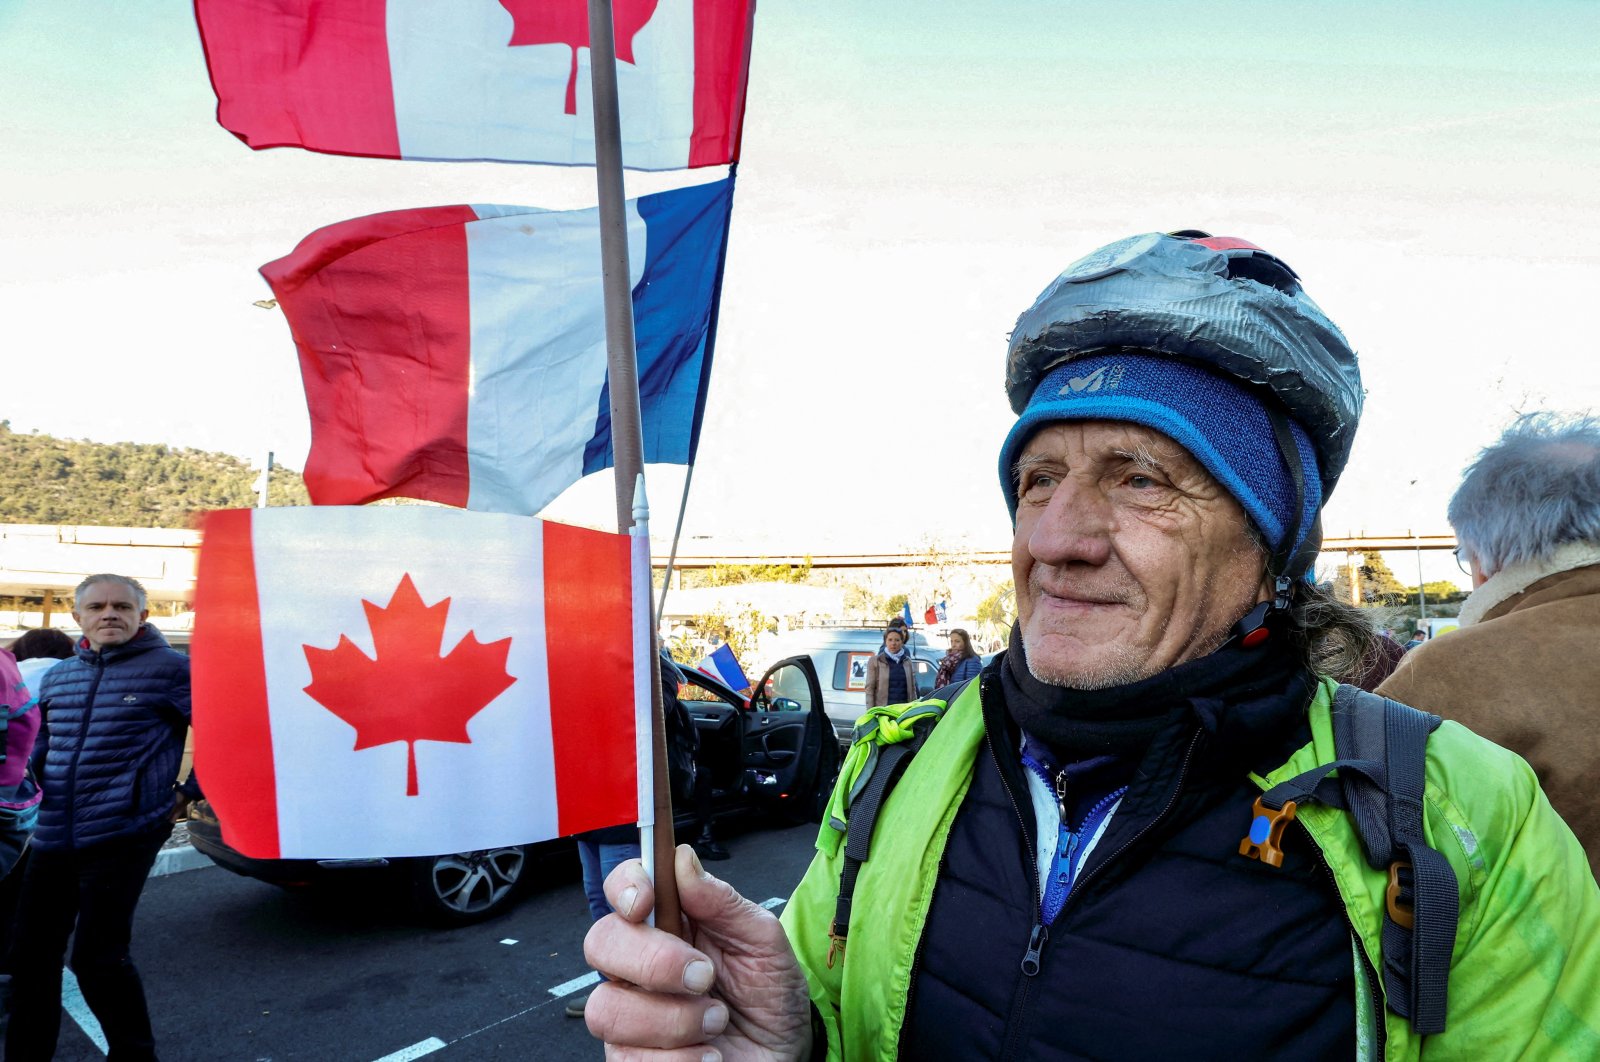 A French activist holds a Canadian flag before the start of their &quot;Convoi de la liberte&quot; (The Freedom Convoy), a vehicular convoy protest converging on Paris to protest COVID-19 restrictions in Nice, France, Feb. 9, 2022. (Reuters Photo)